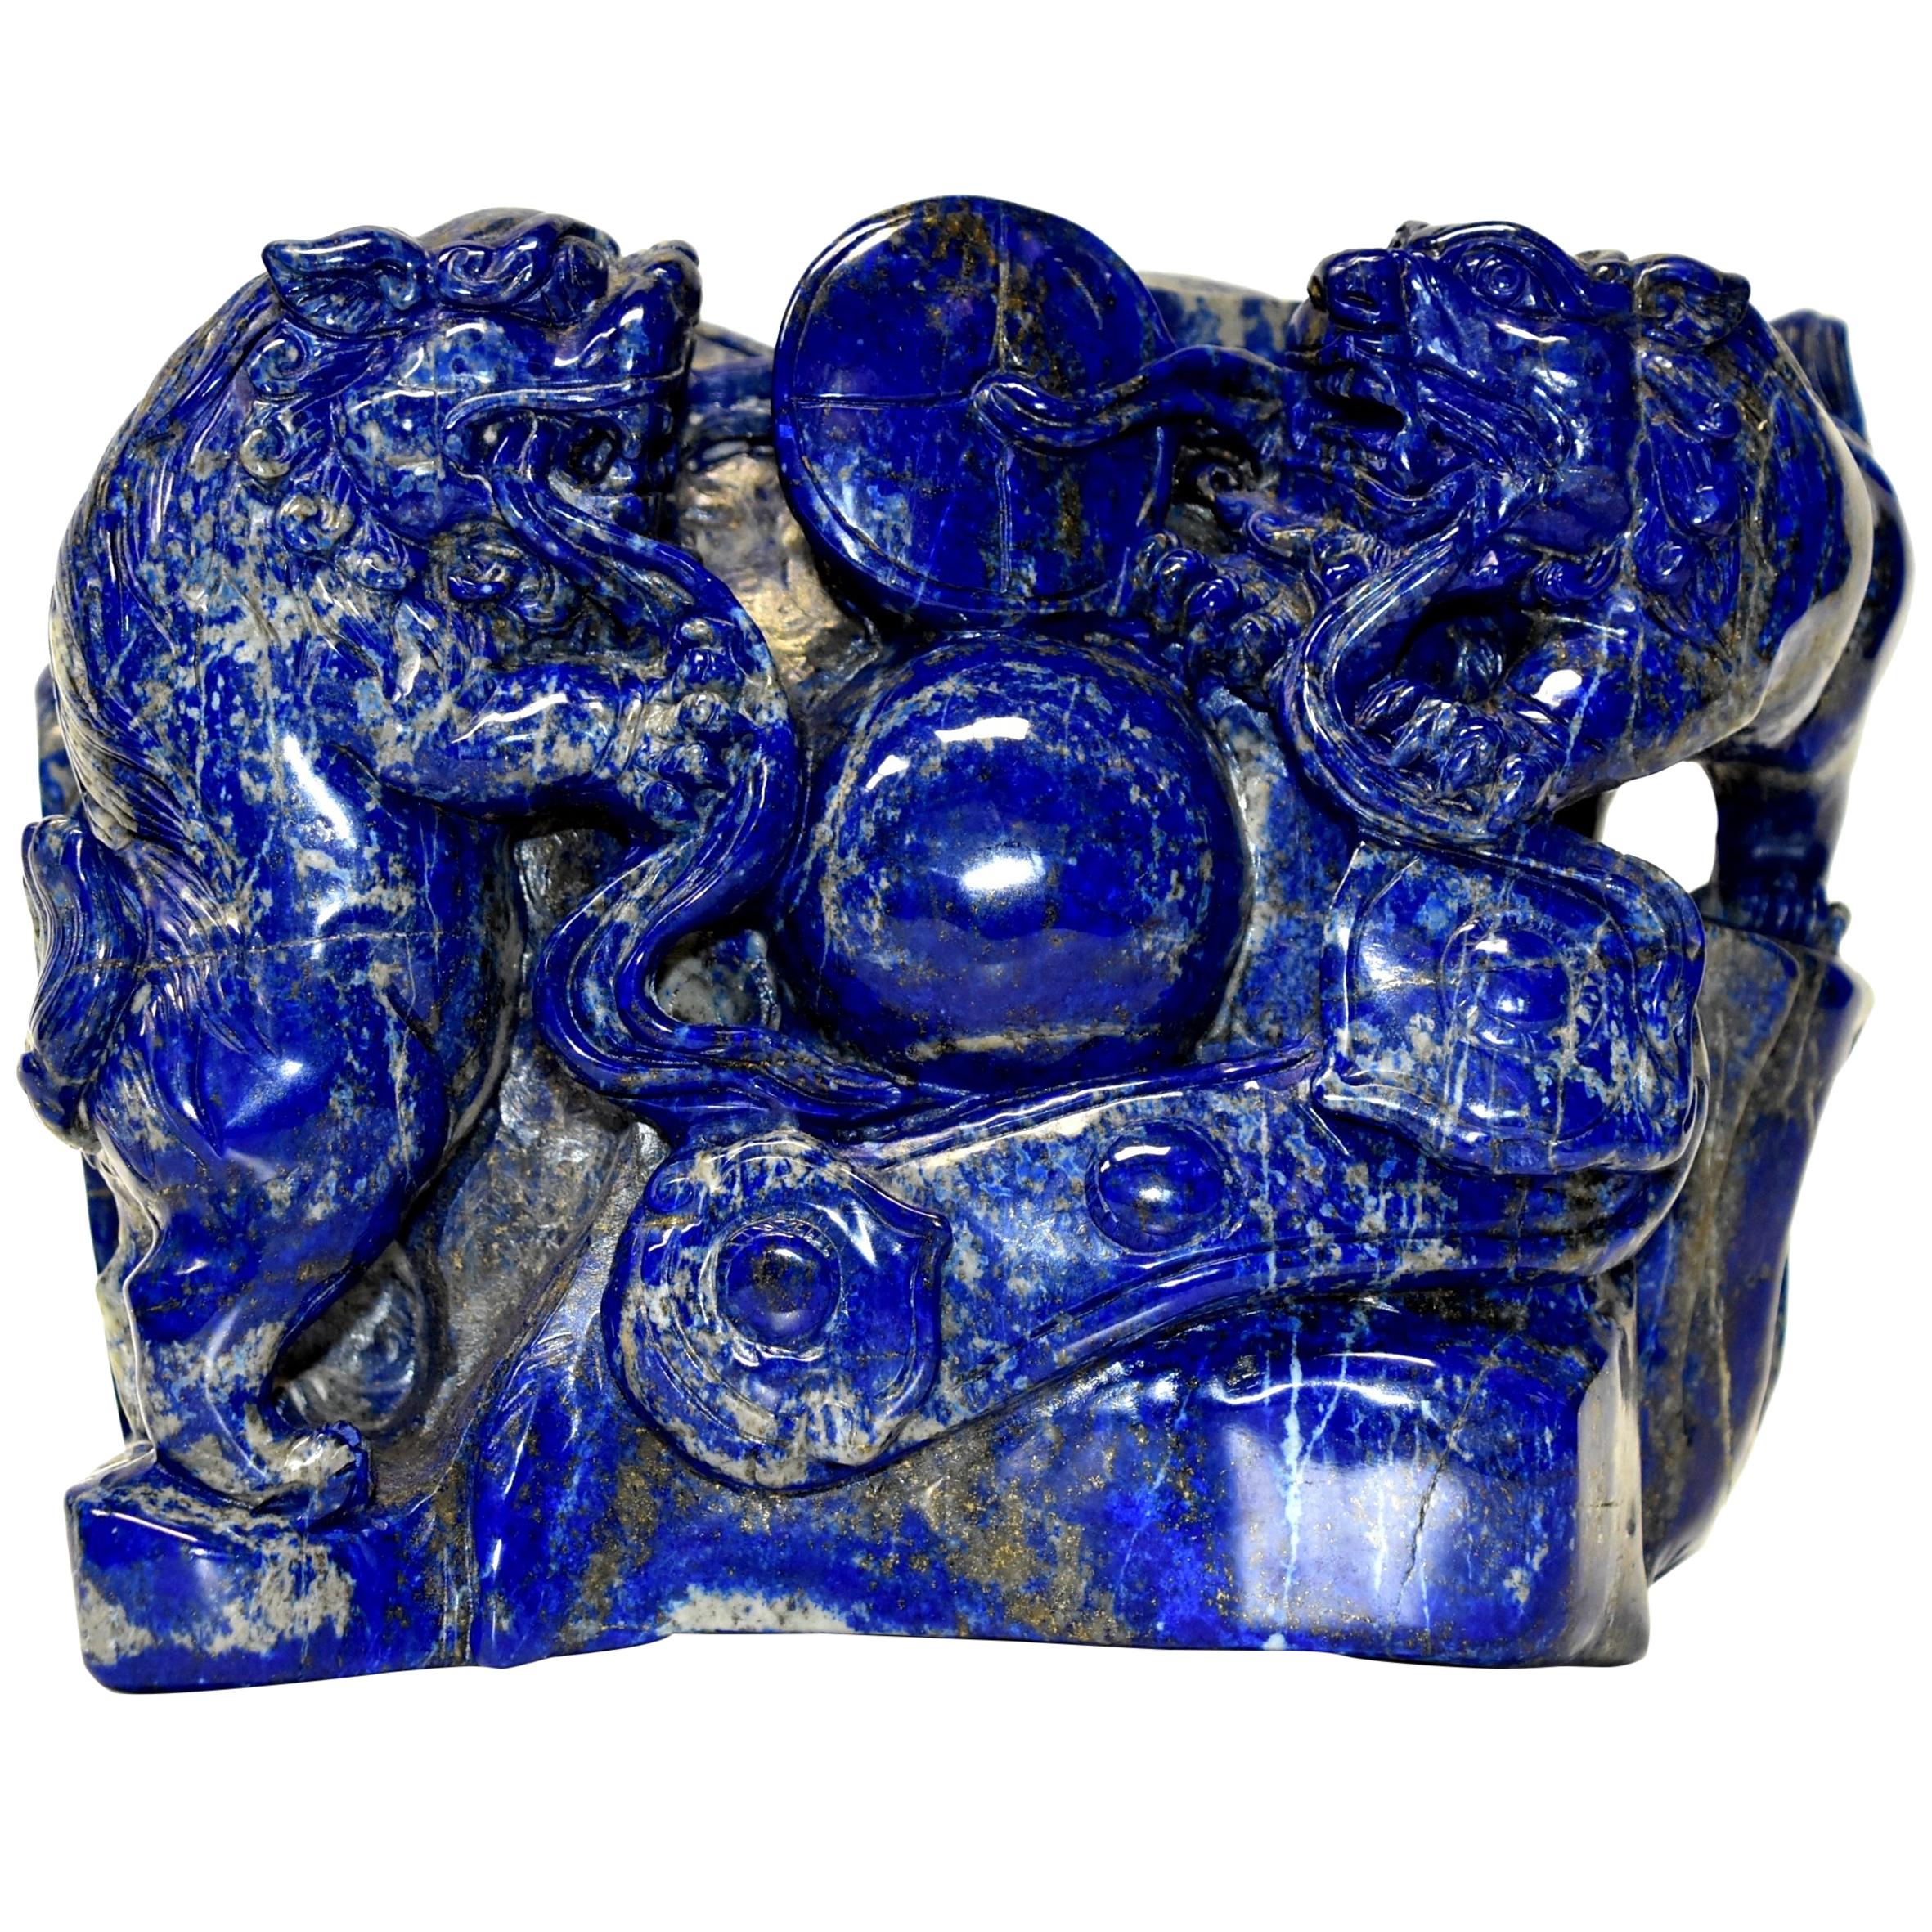 Natural Lapis Lazuli 8 lb Block with Carved Lions